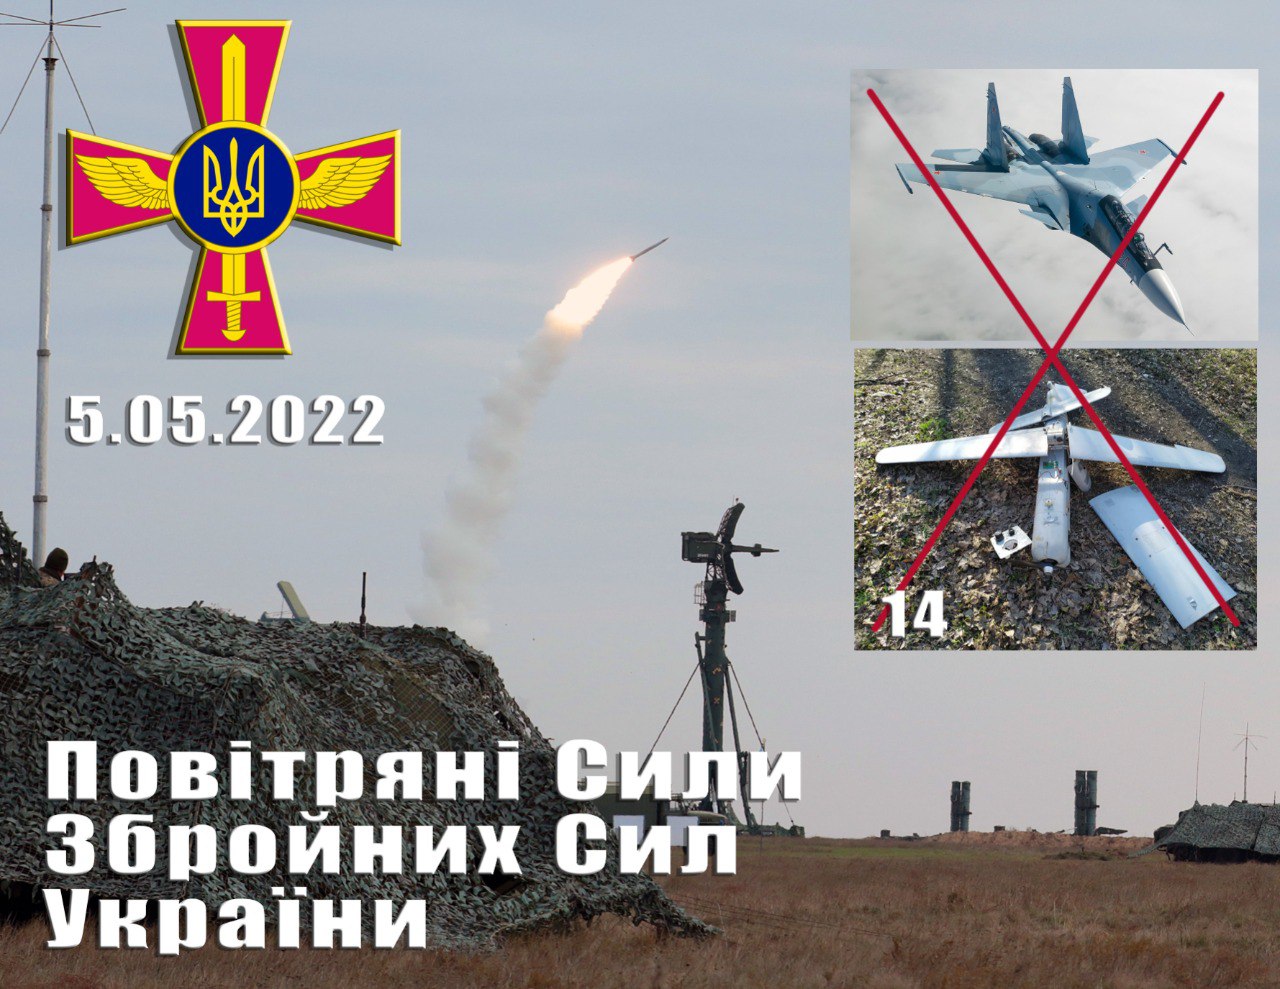 On May 5 the Armed Forces of Ukraine shot down 14 russian drones as well as Su-30CM fighter